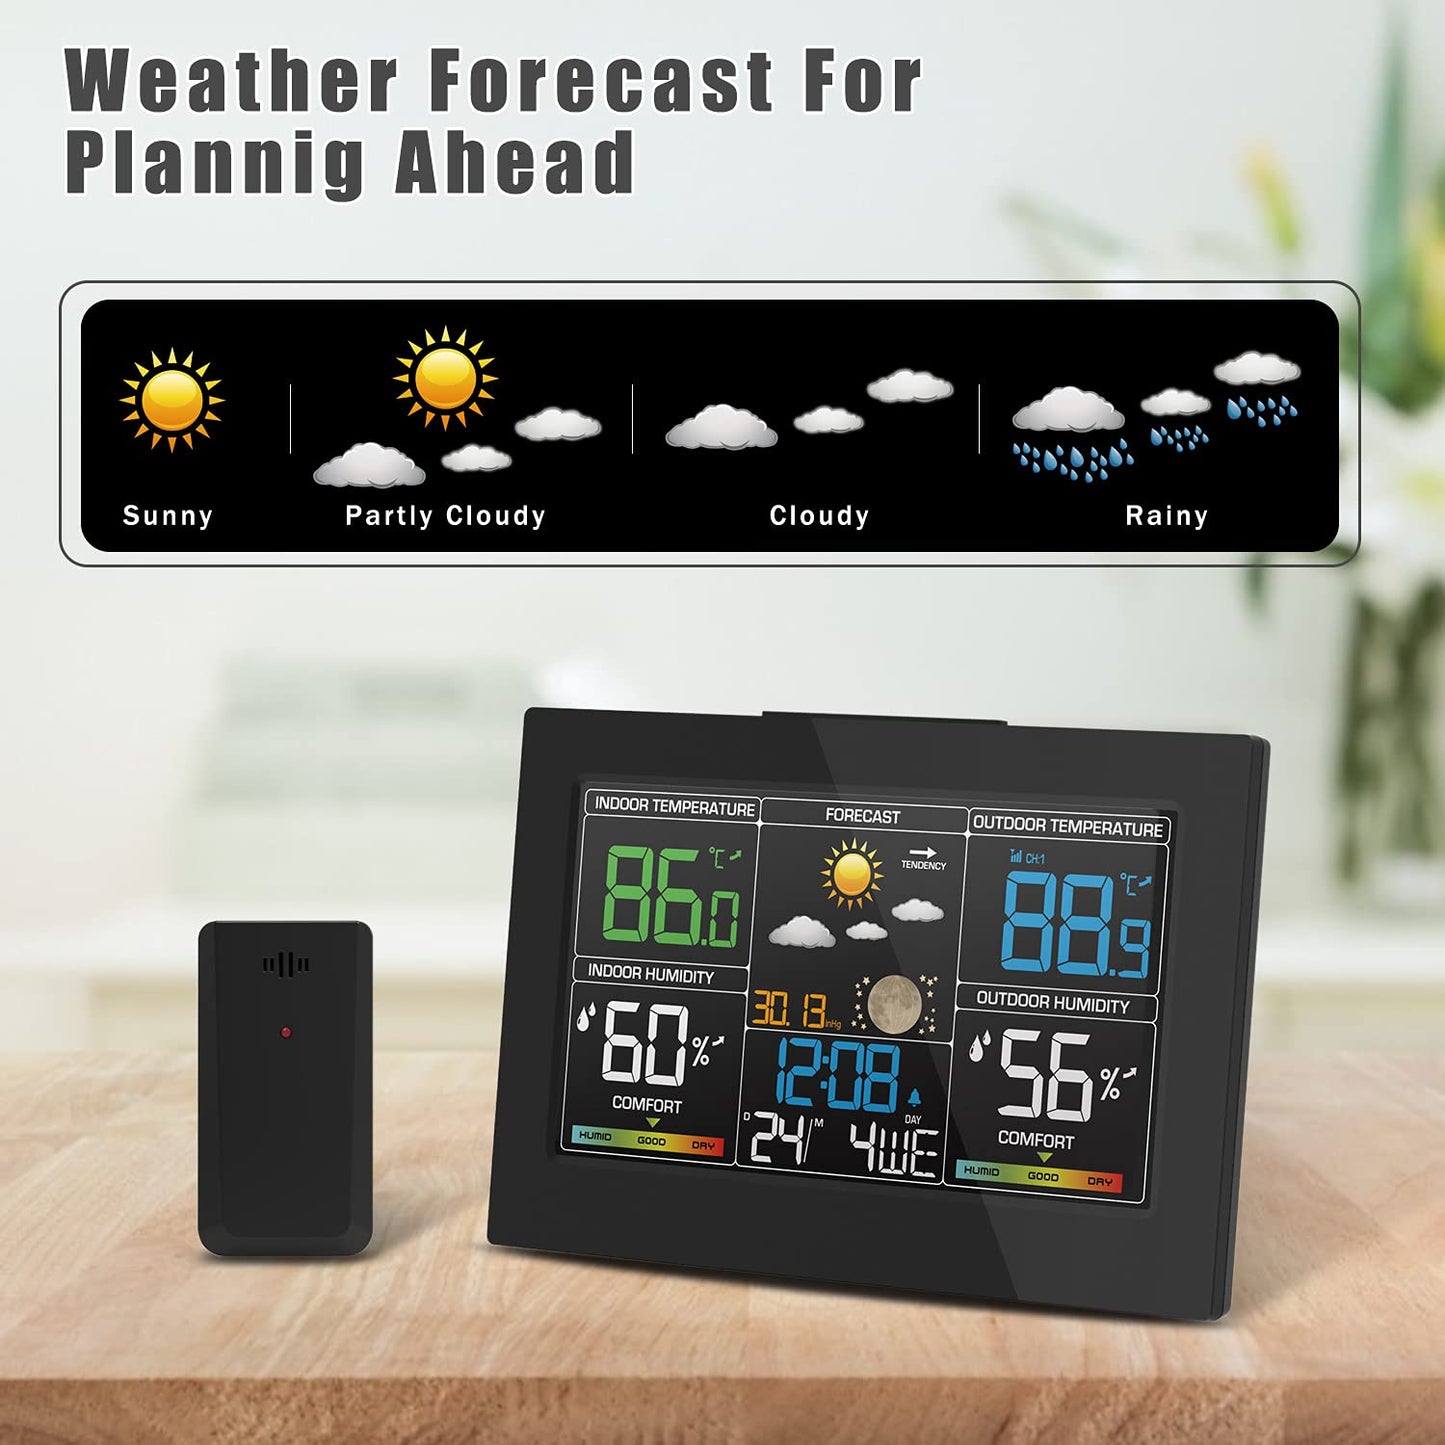 Geevon Weather Station Wireless Indoor Outdoor Thermometer Multiple  Sensors, Digital Temperature Humidity Monitor with Removable DIY Label  Stickers, Dual Alarms and Adjustable Backlight 